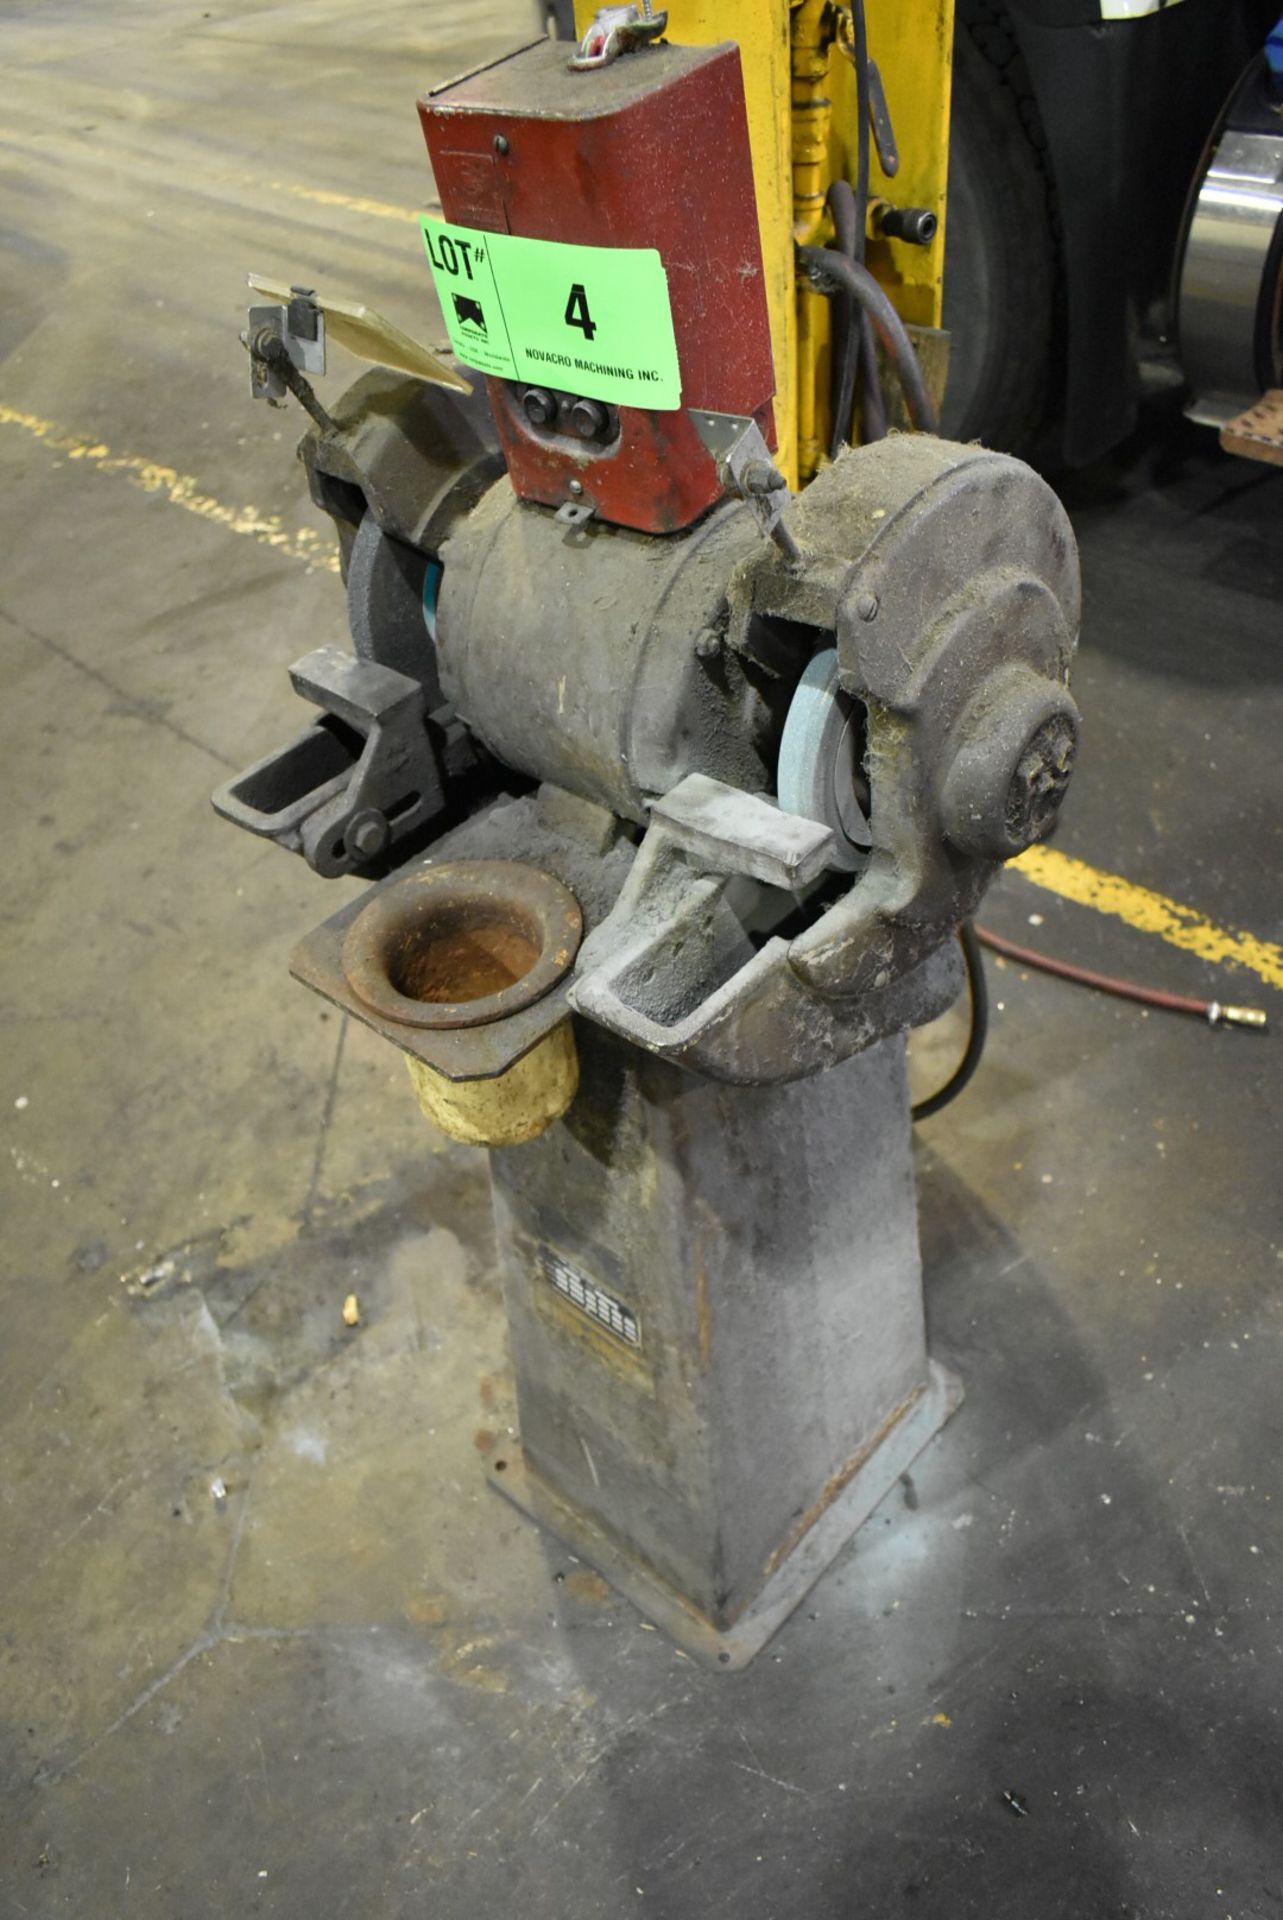 FORD-SMITH MODEL 40 10" DOUBLE END PEDESTAL GRINDER WITH SPEEDS TO 1725 RPM, S/N: 66412 (CI) - Image 2 of 3